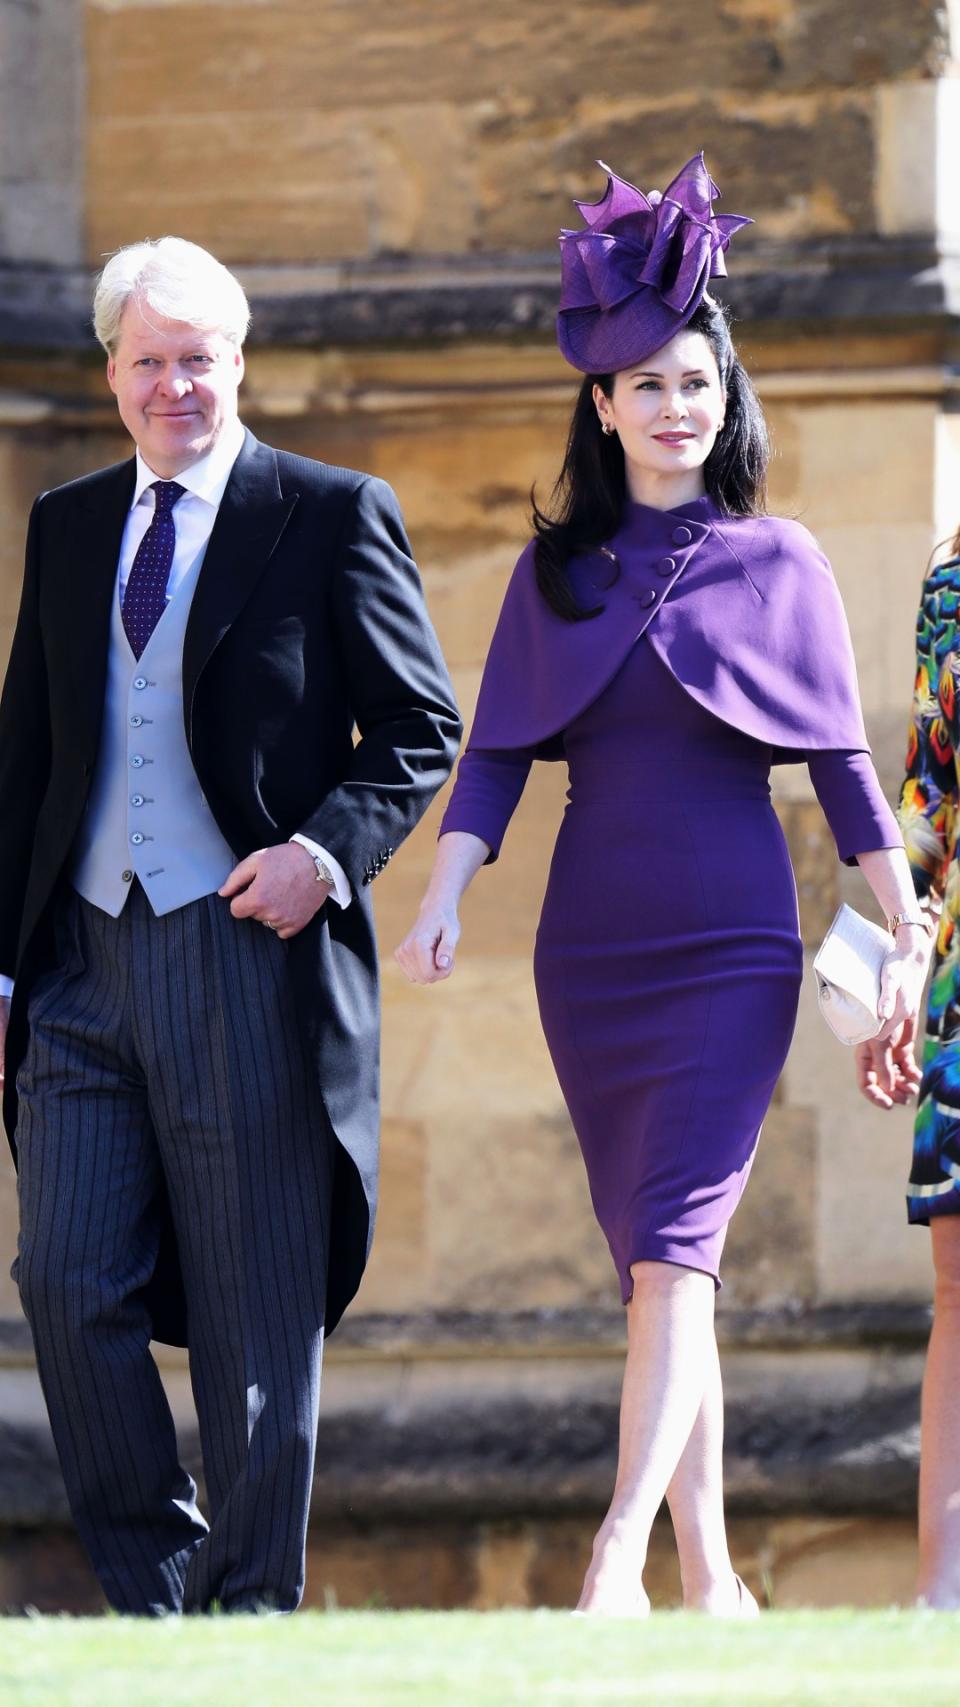 <p> Karen Spencer - who married Princess Diana's brother, Charles in 2011 - wore a favourite colour of the royals for Harry and Meghan's wedding. Looking regal, Karen sported a custom Pamella Roland royal purple capelet and a form-fitting knee-length dress. </p> <p> She finished her outfit with an elaborate fascinator in the same shade, which perfectly complimented her raven black hair. </p>